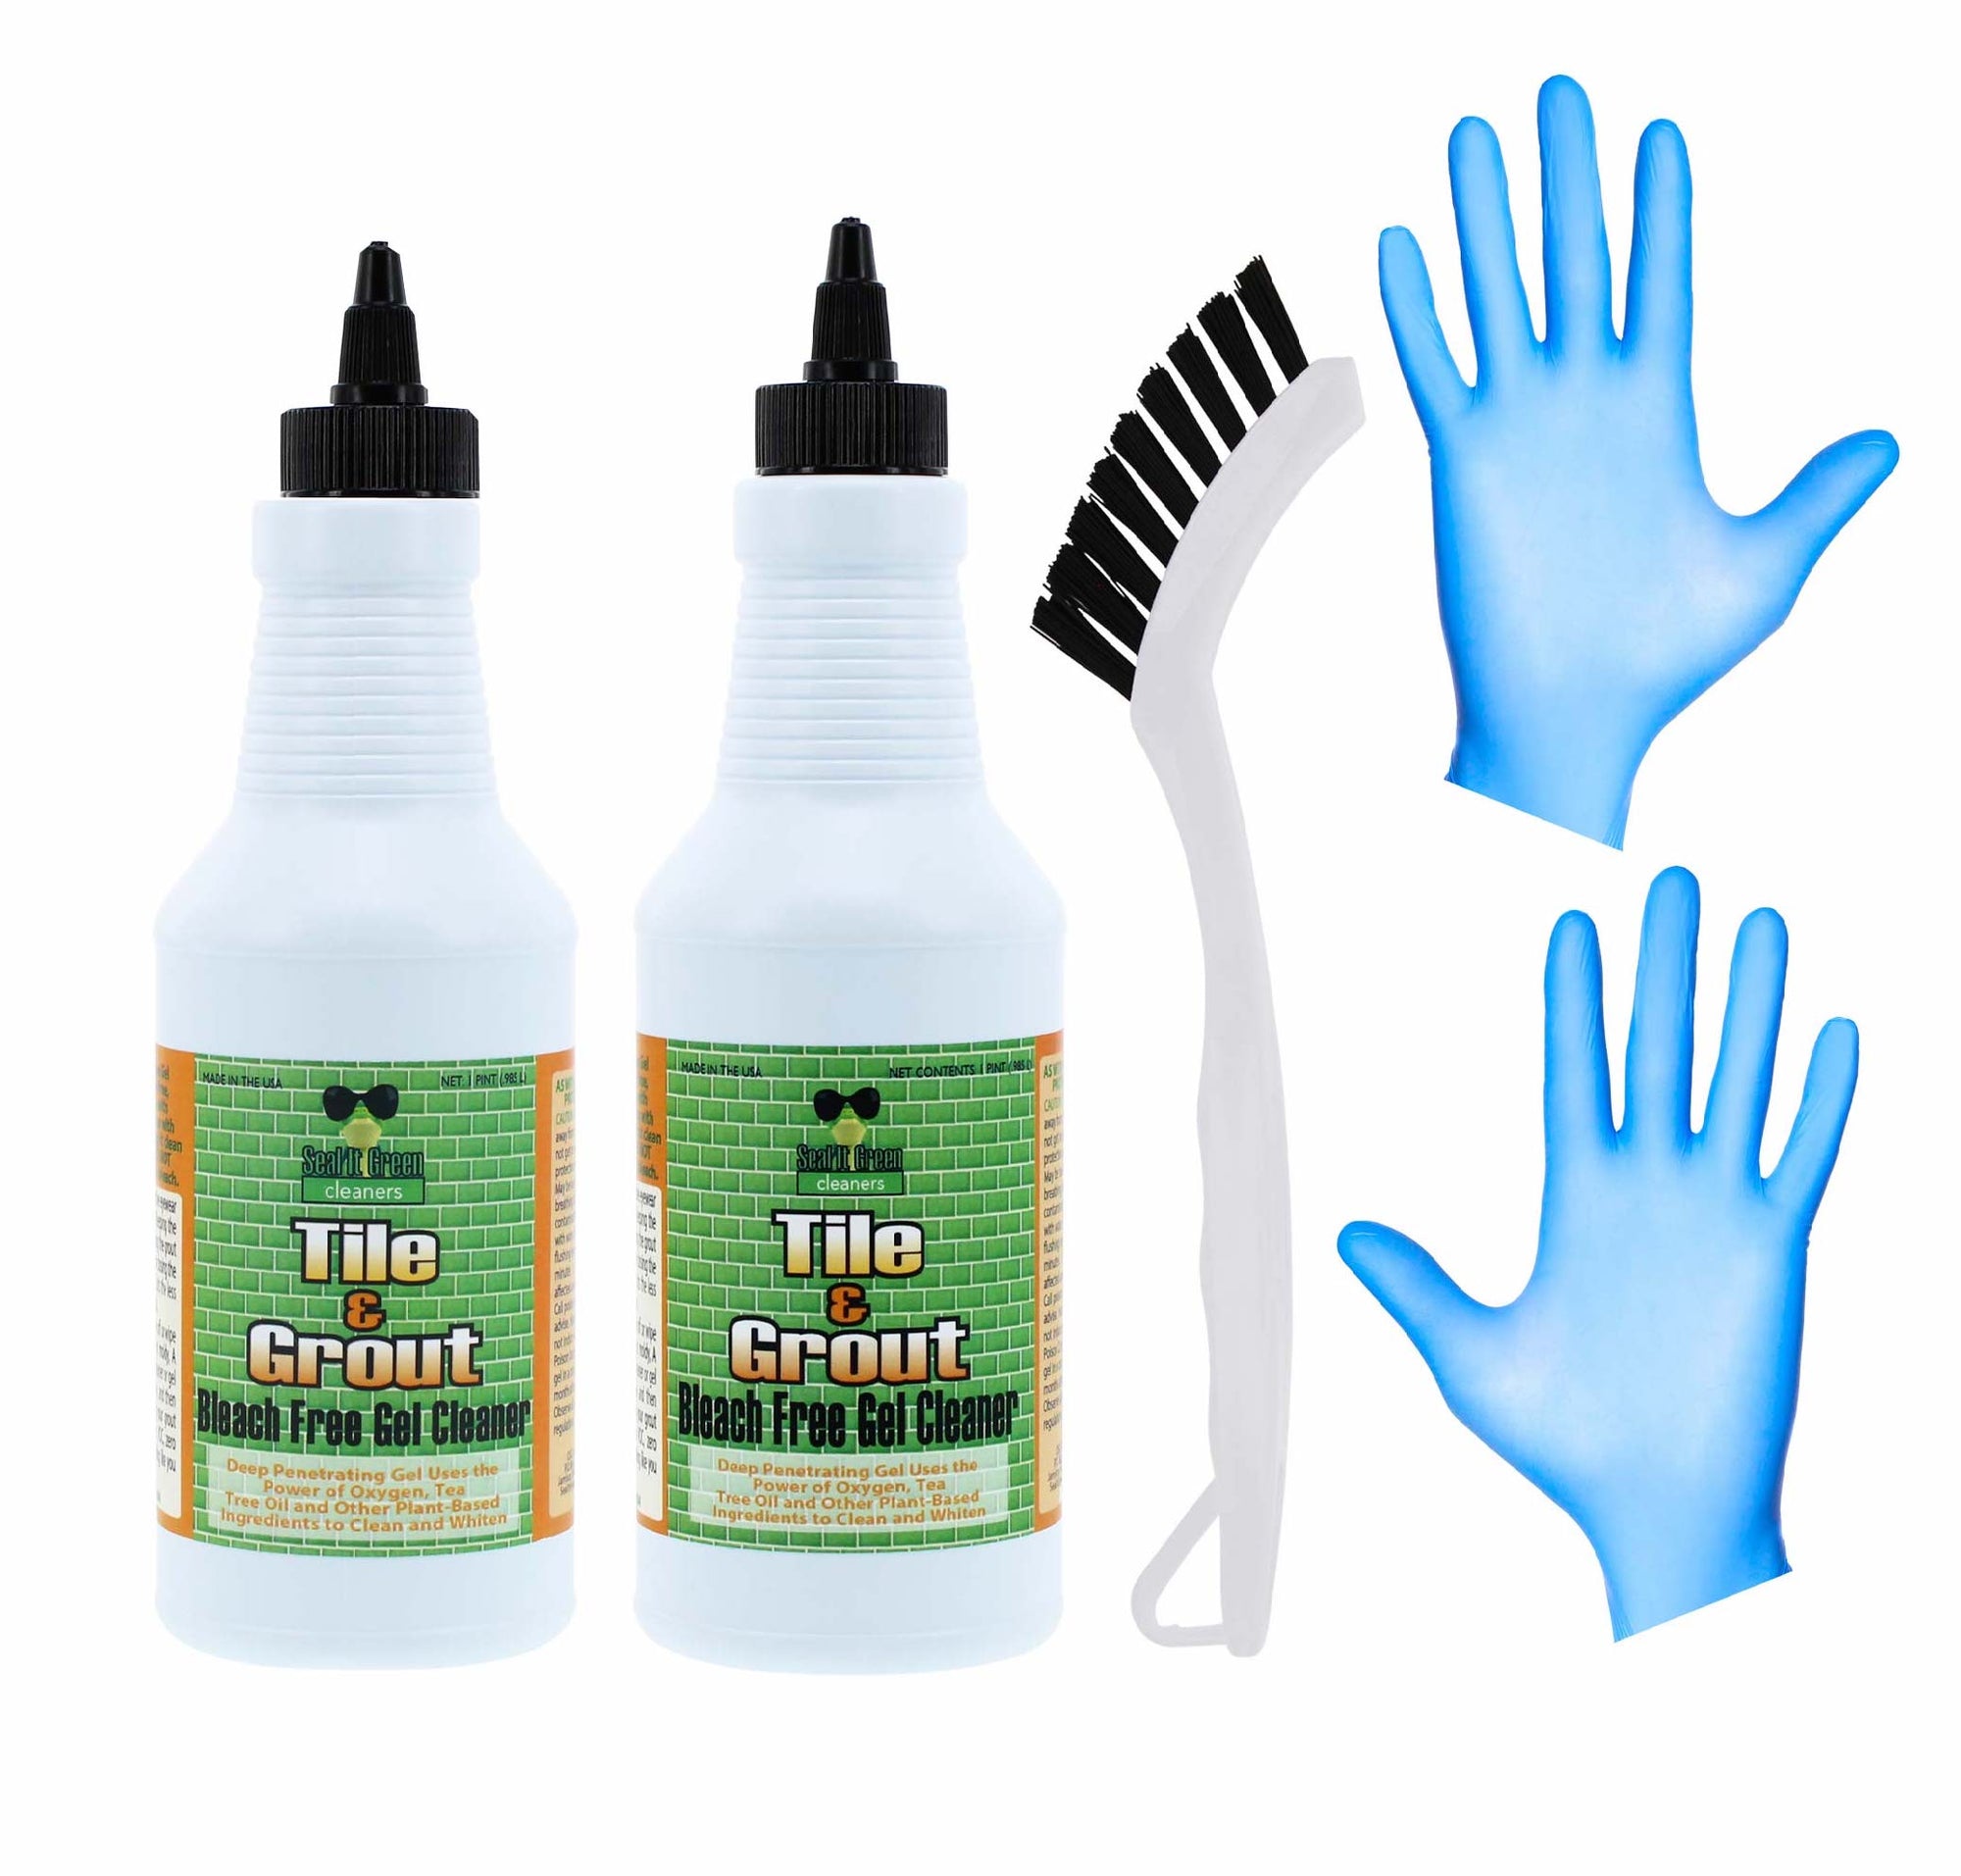 Tile and Grout cleaner